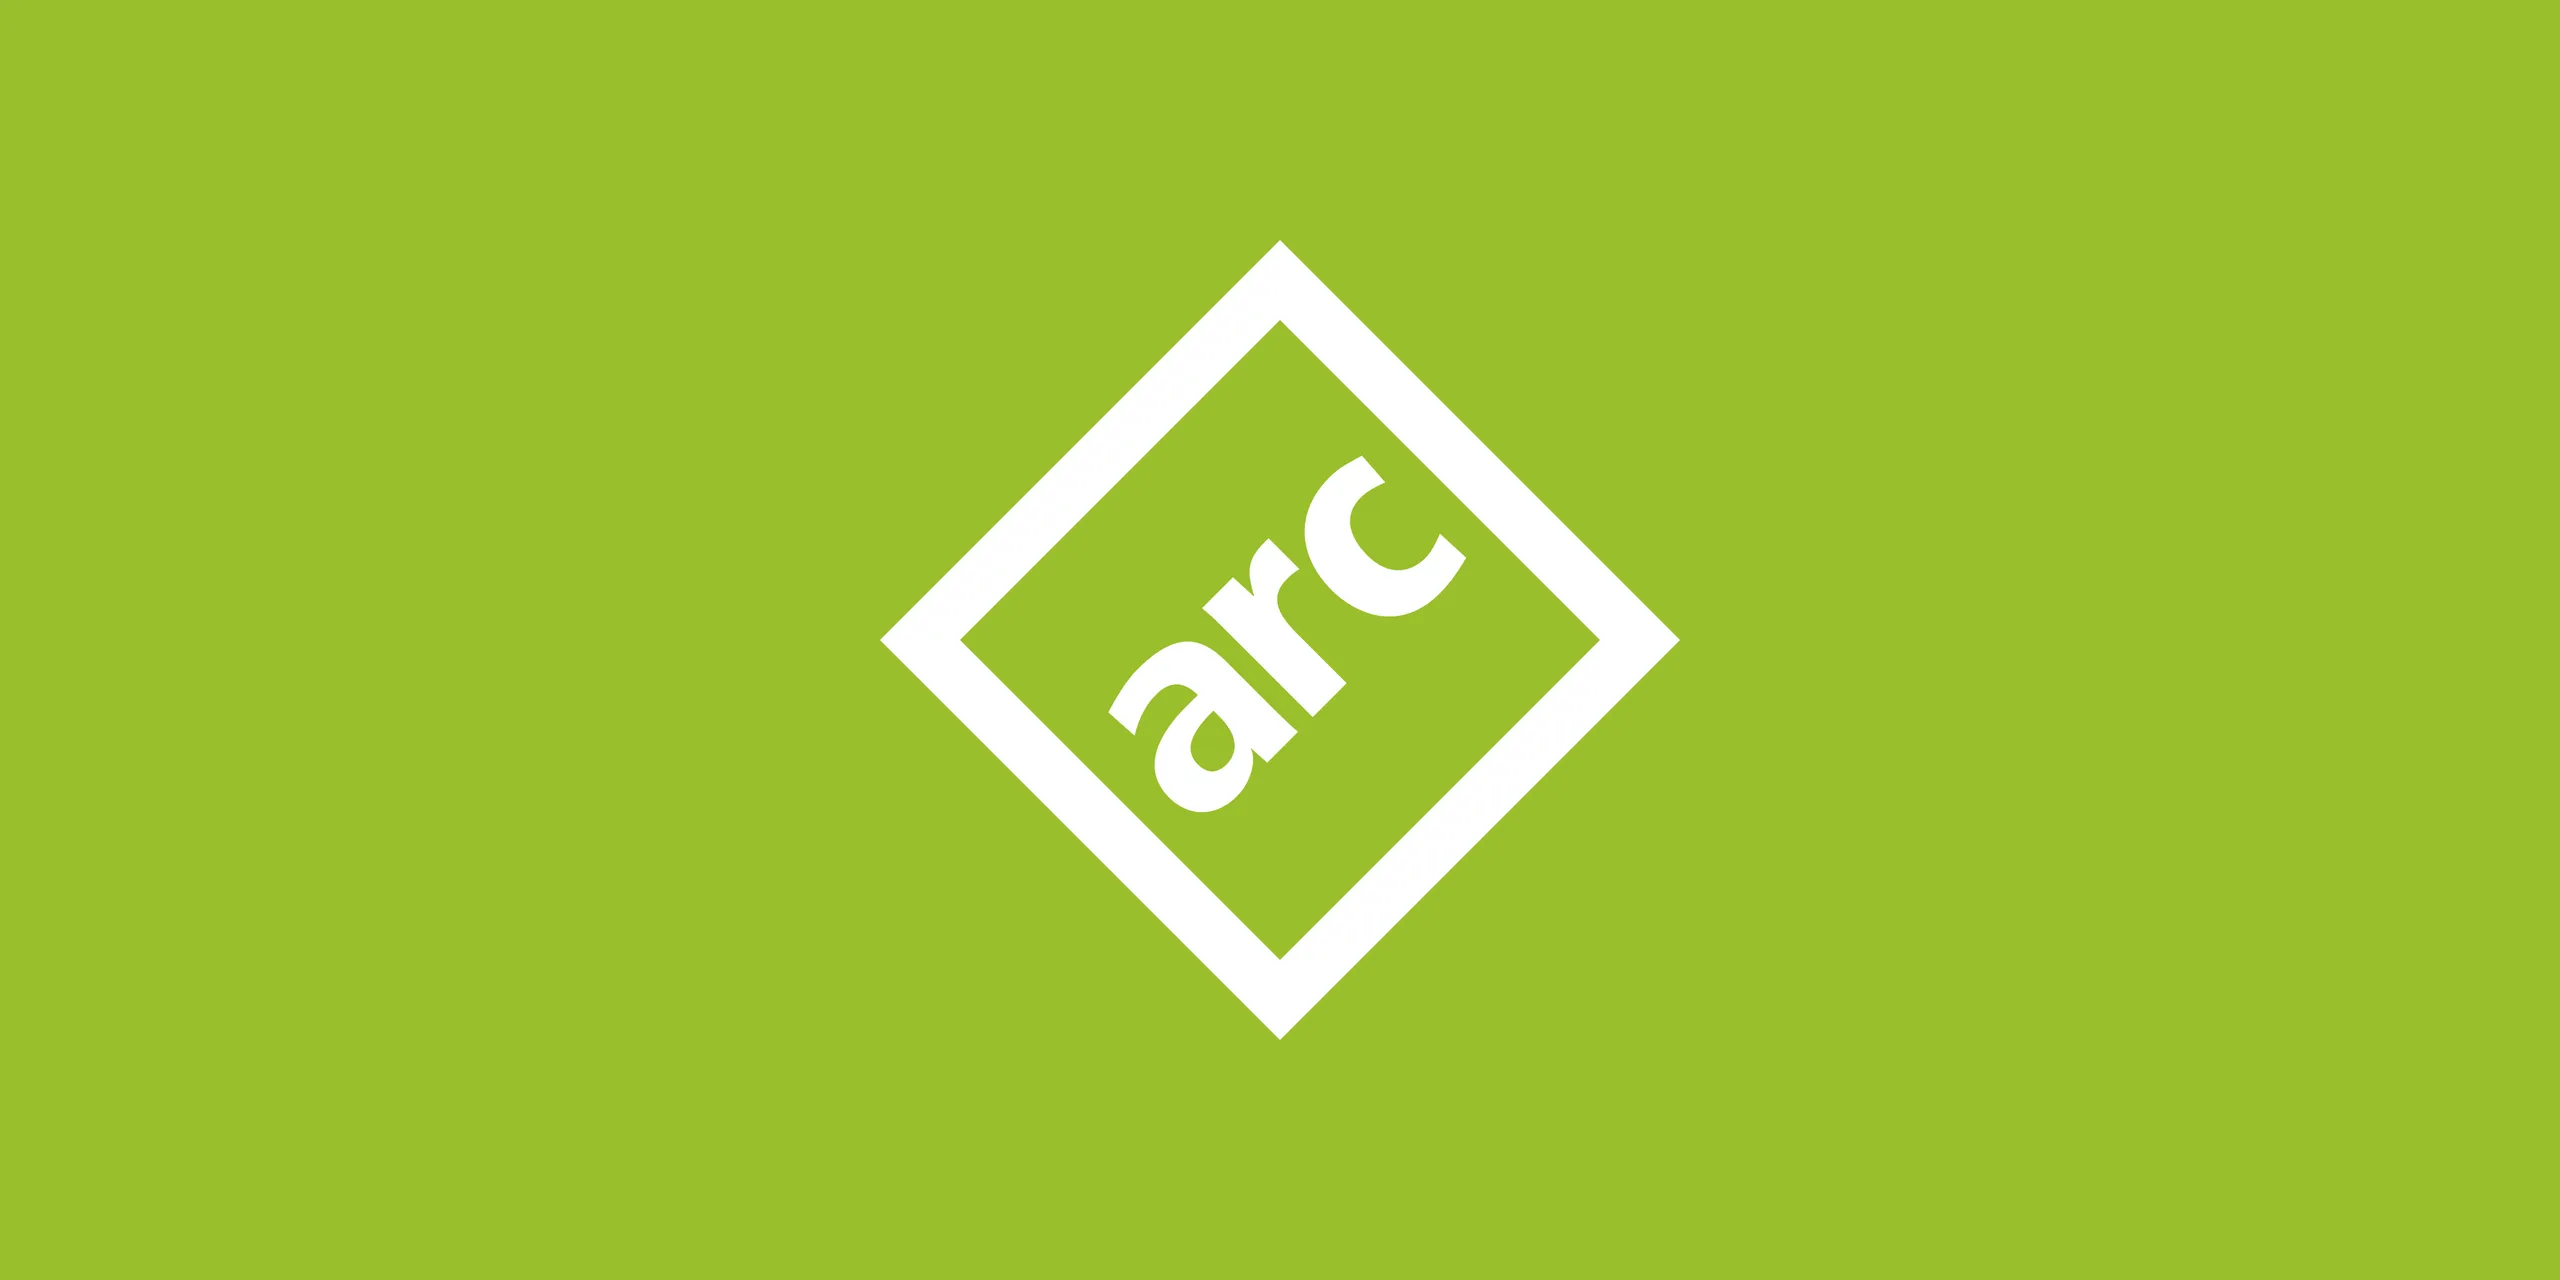 ARC Entotech logo in white on a bright green ground